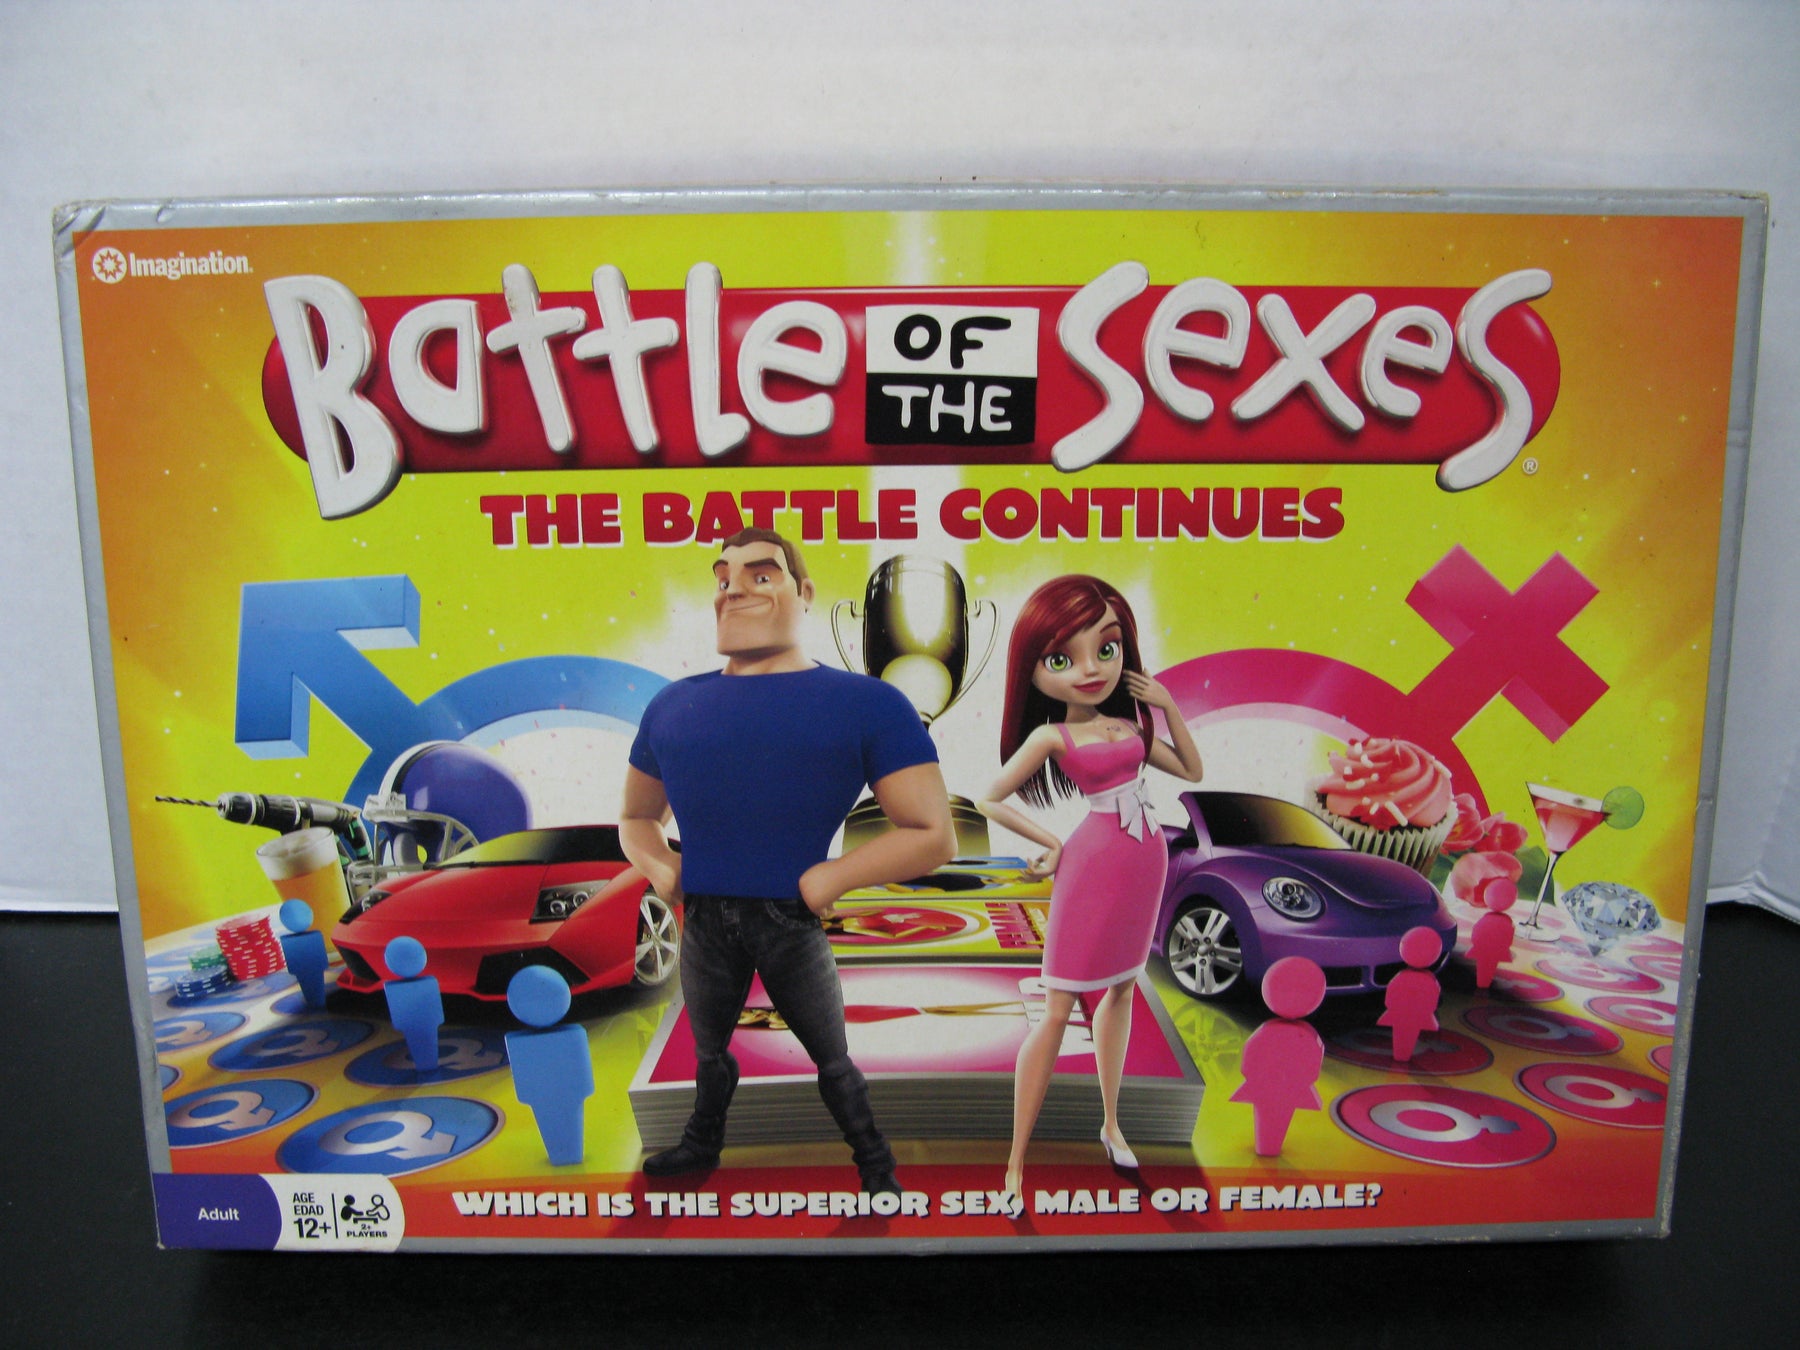 Battle of the Sexes Toplist card game, Board Game